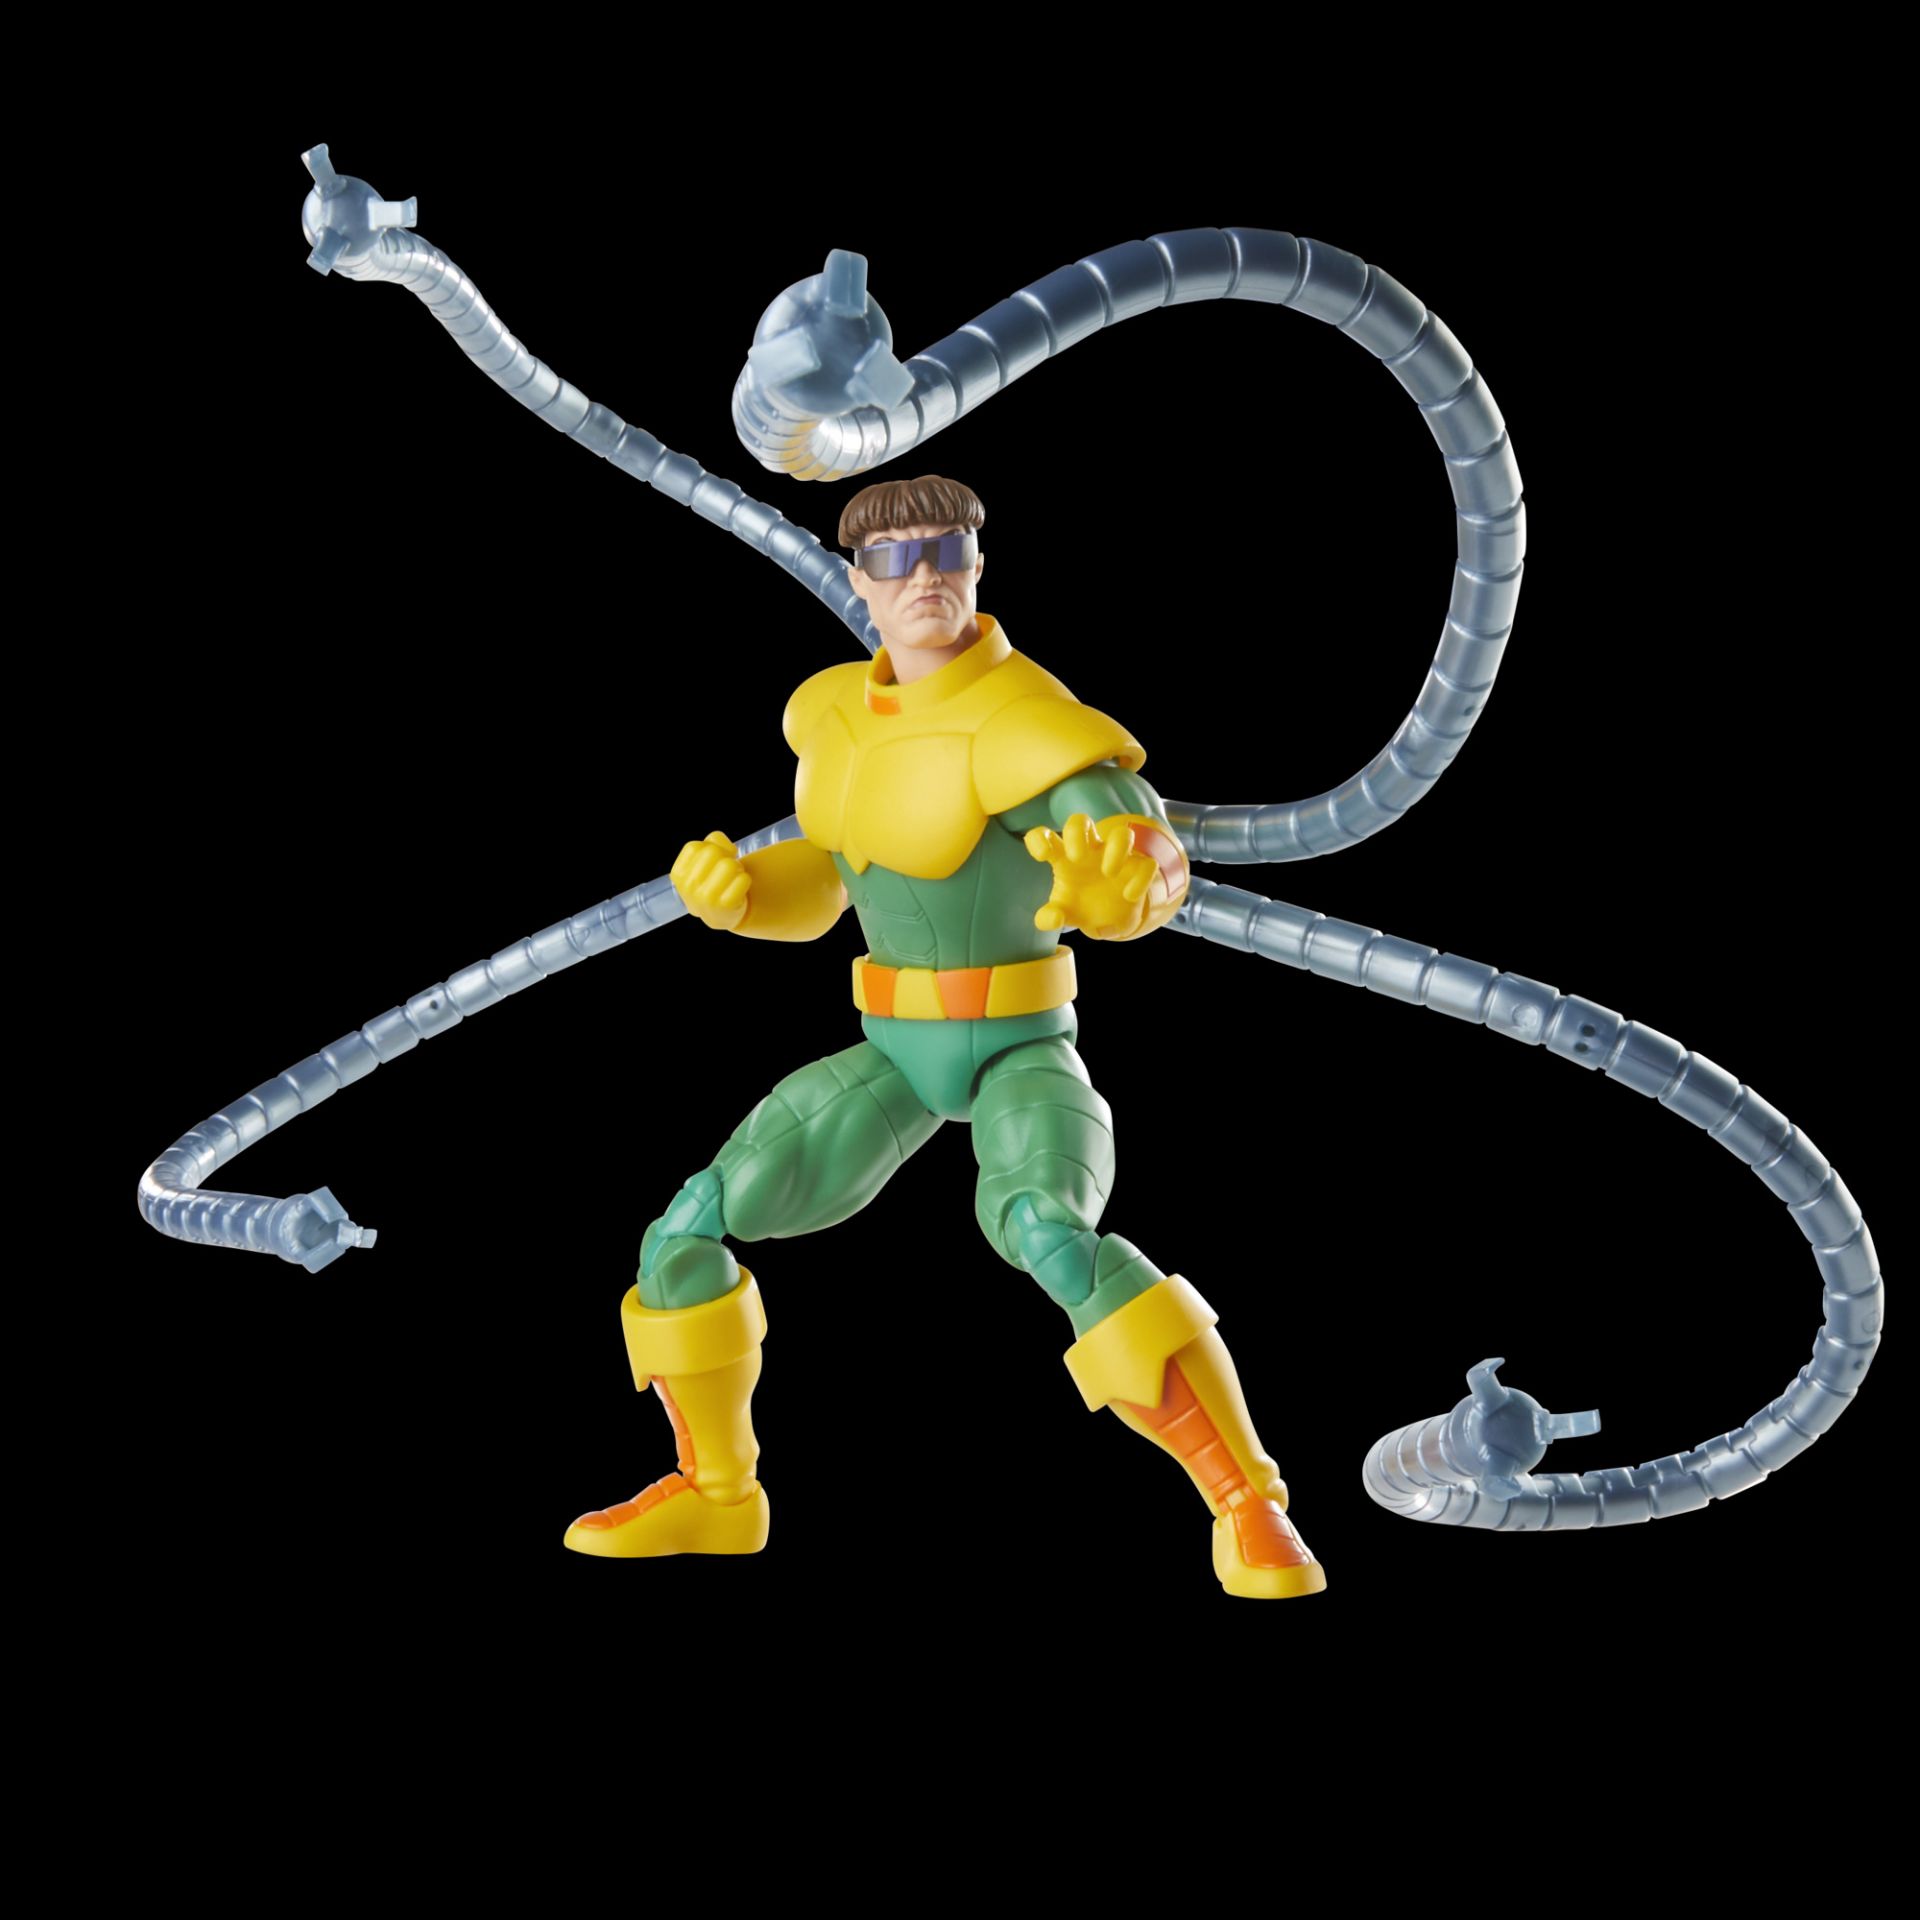 Spider-Man Marvel Legends Doctor Octopus & Aunt May 6-Inch Action